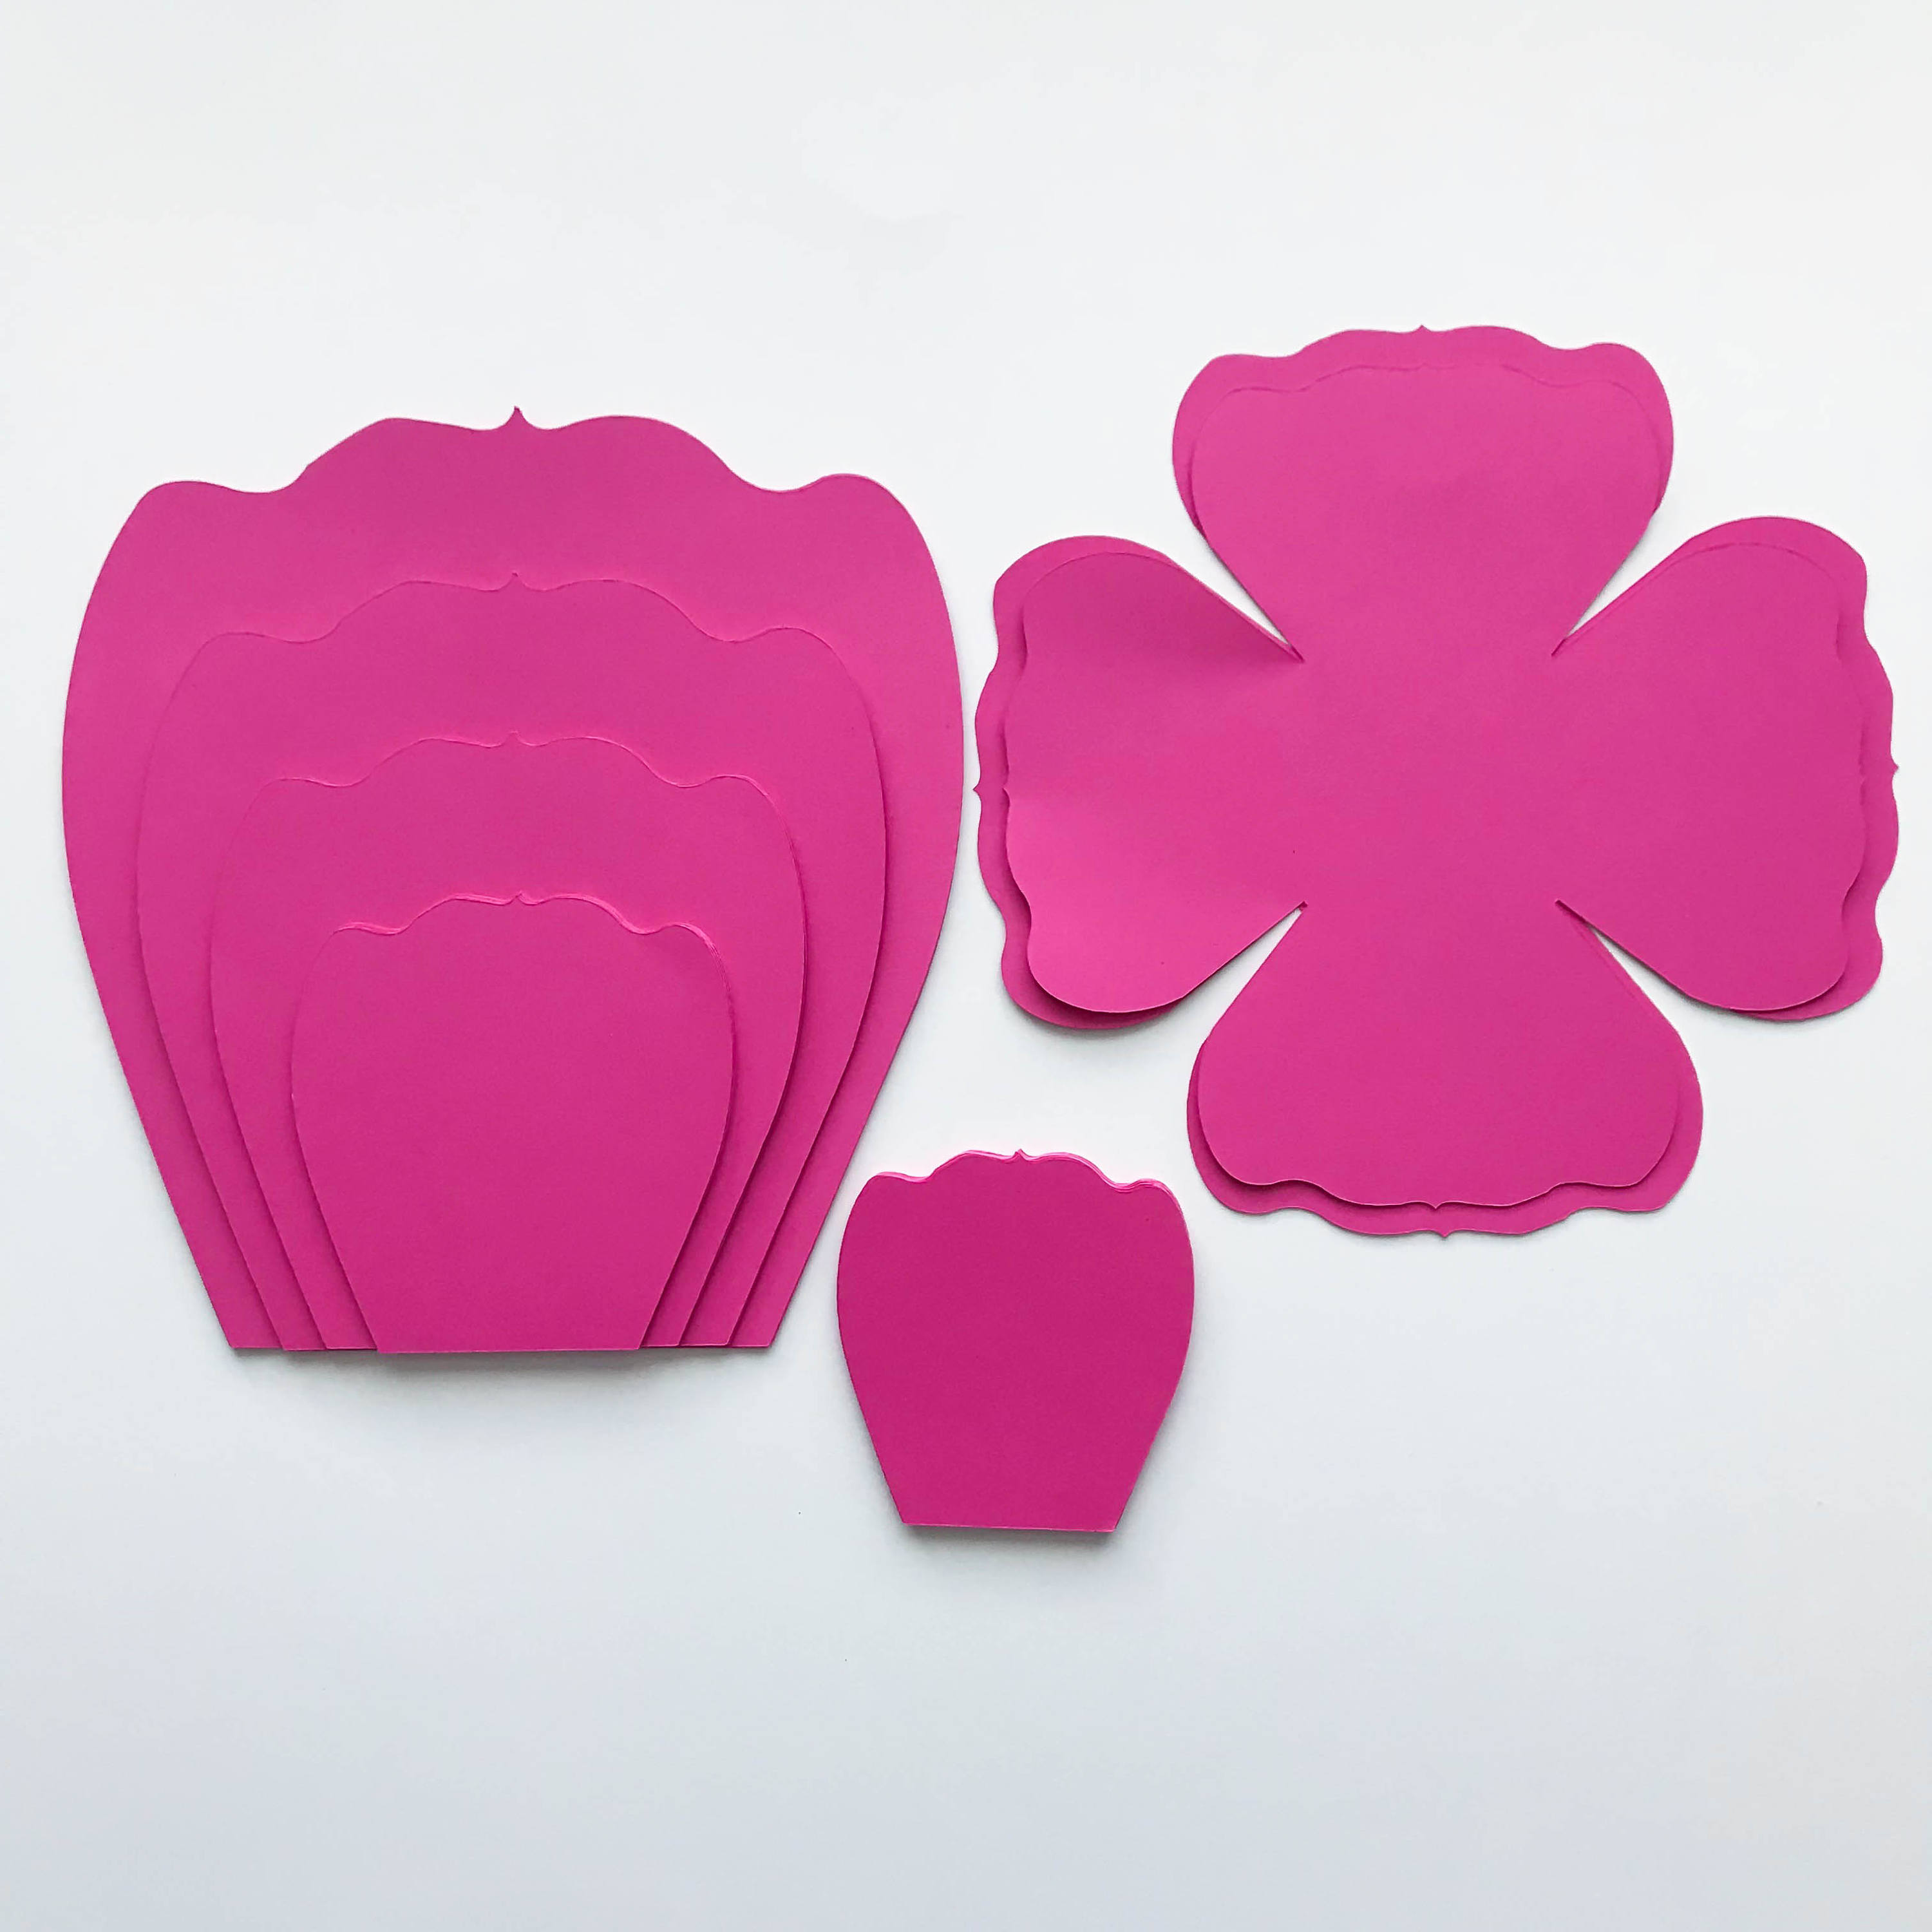 SVG PNG DXF Petal 31 Cut Files for Cutting Machines Diy Paper Flowers